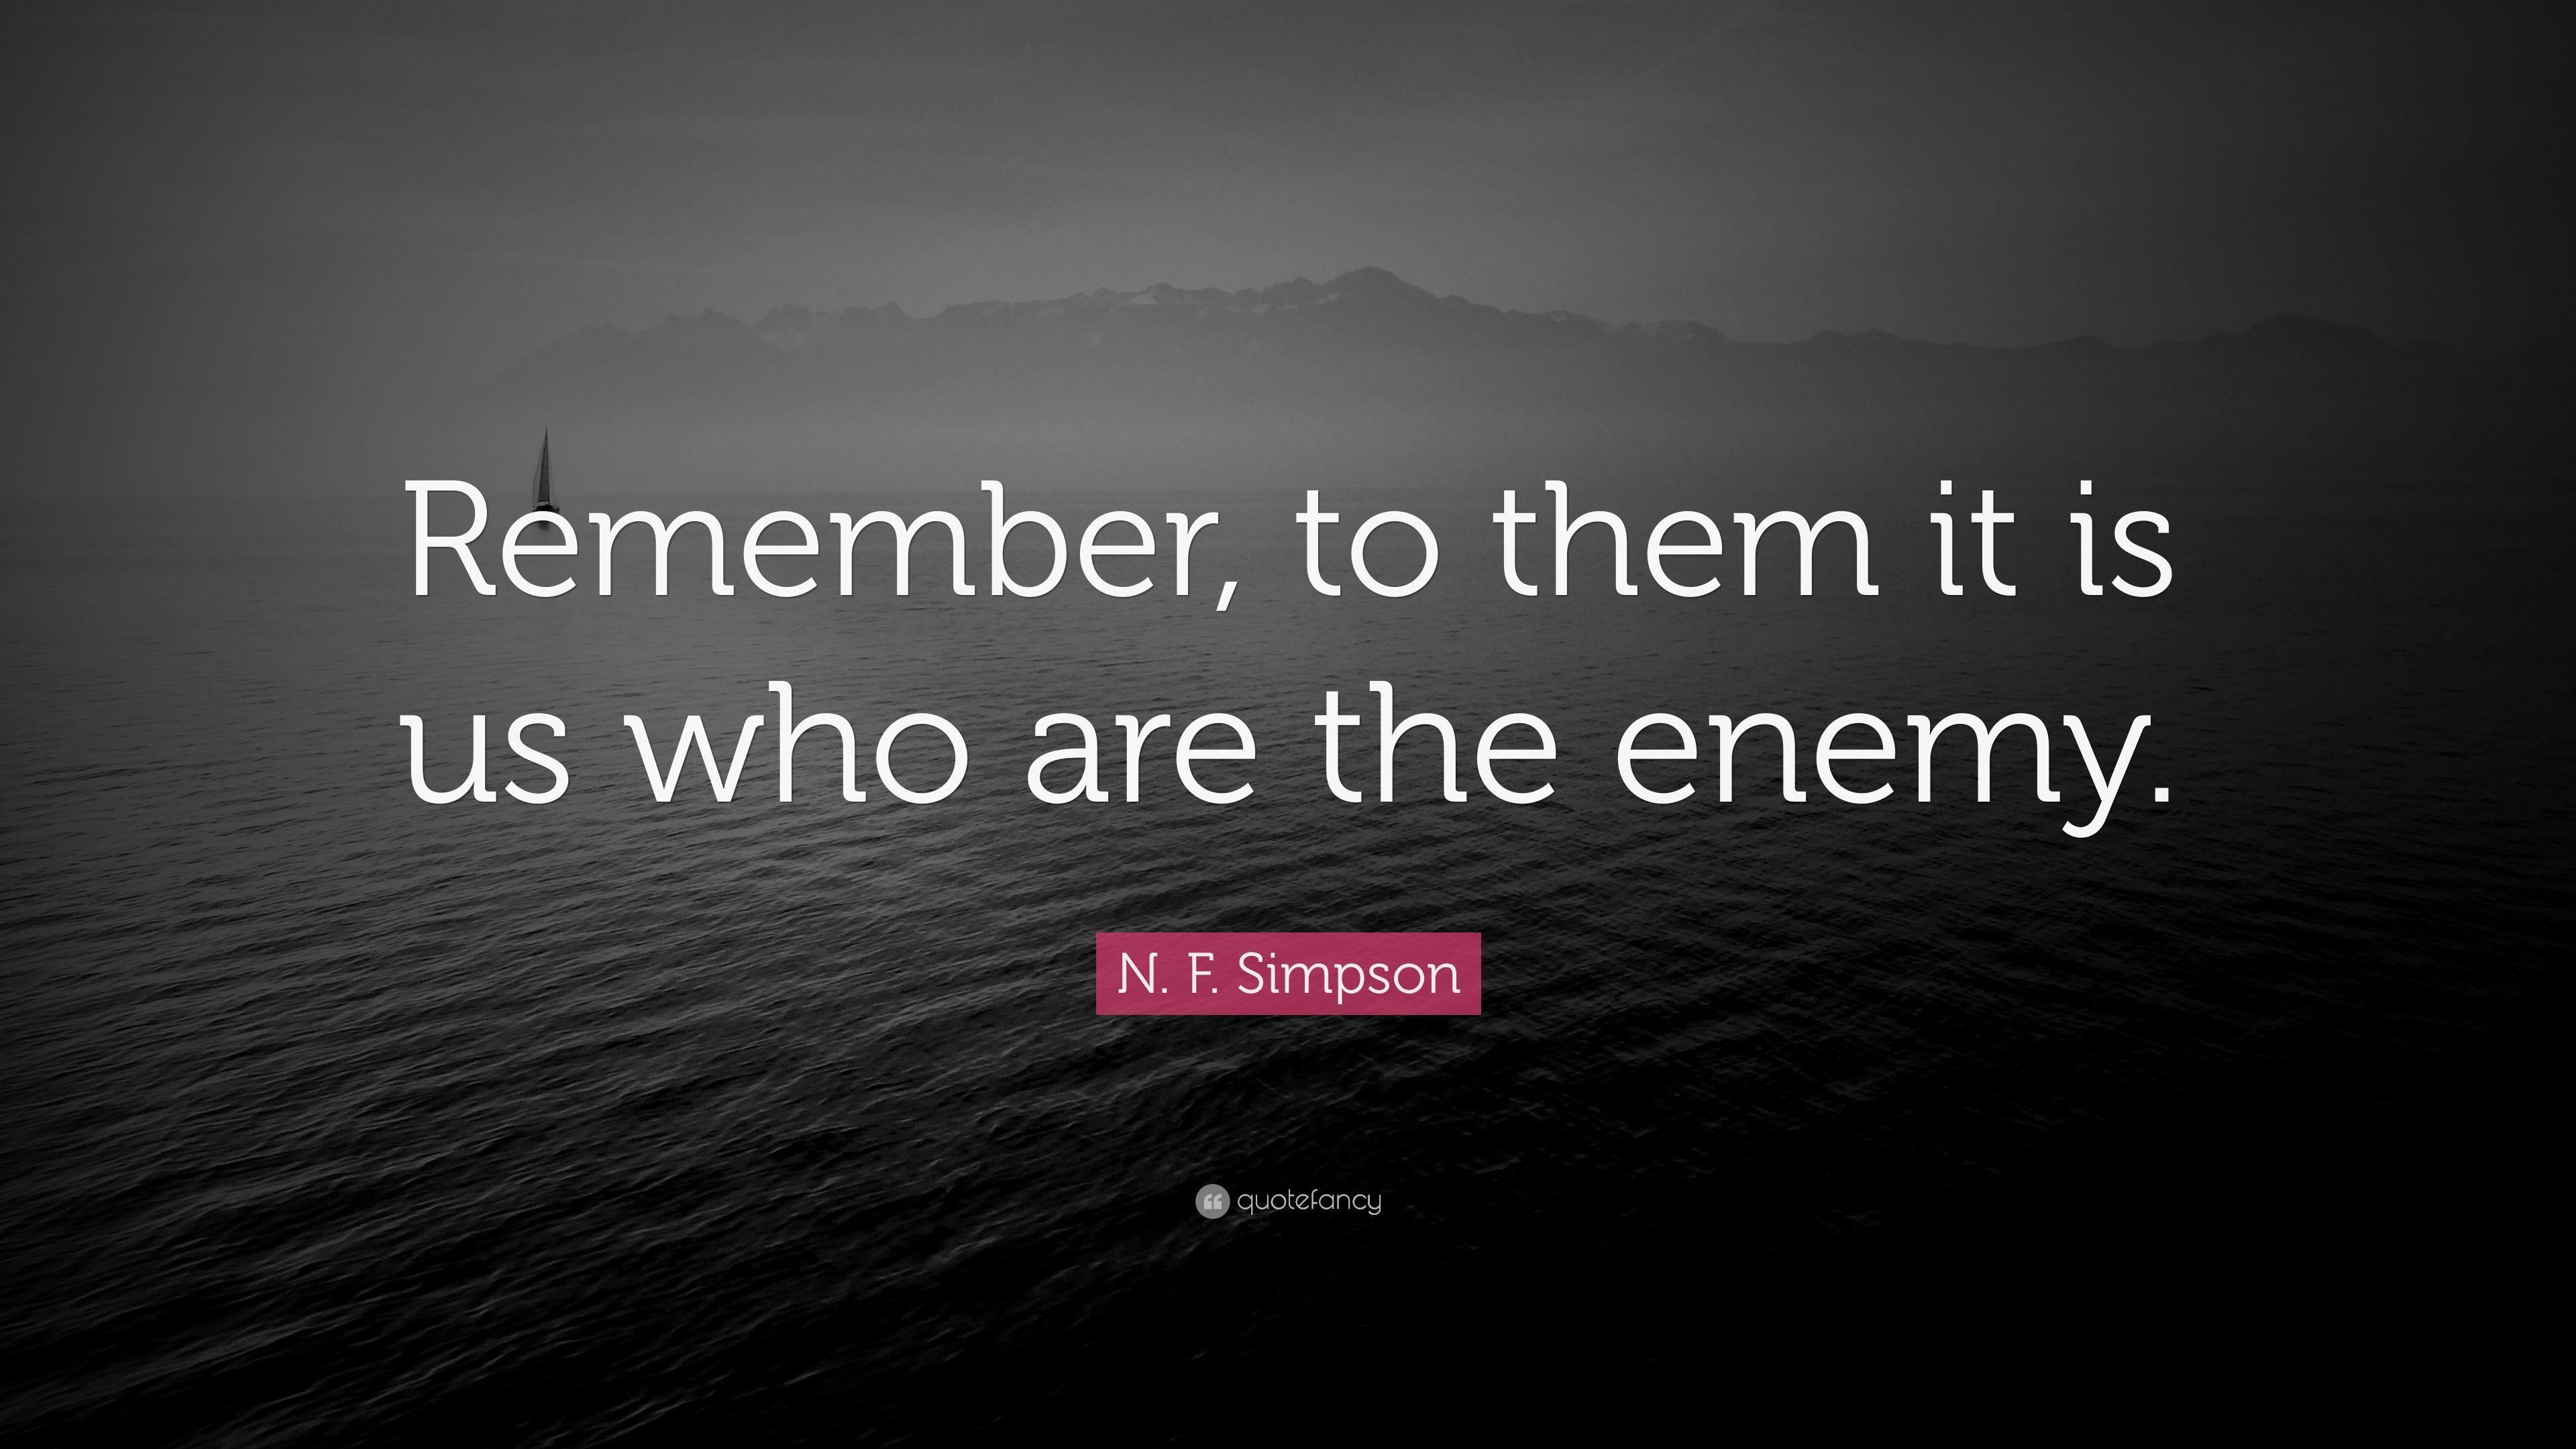 N. F. Simpson Quote: “Remember, to them it is us who are